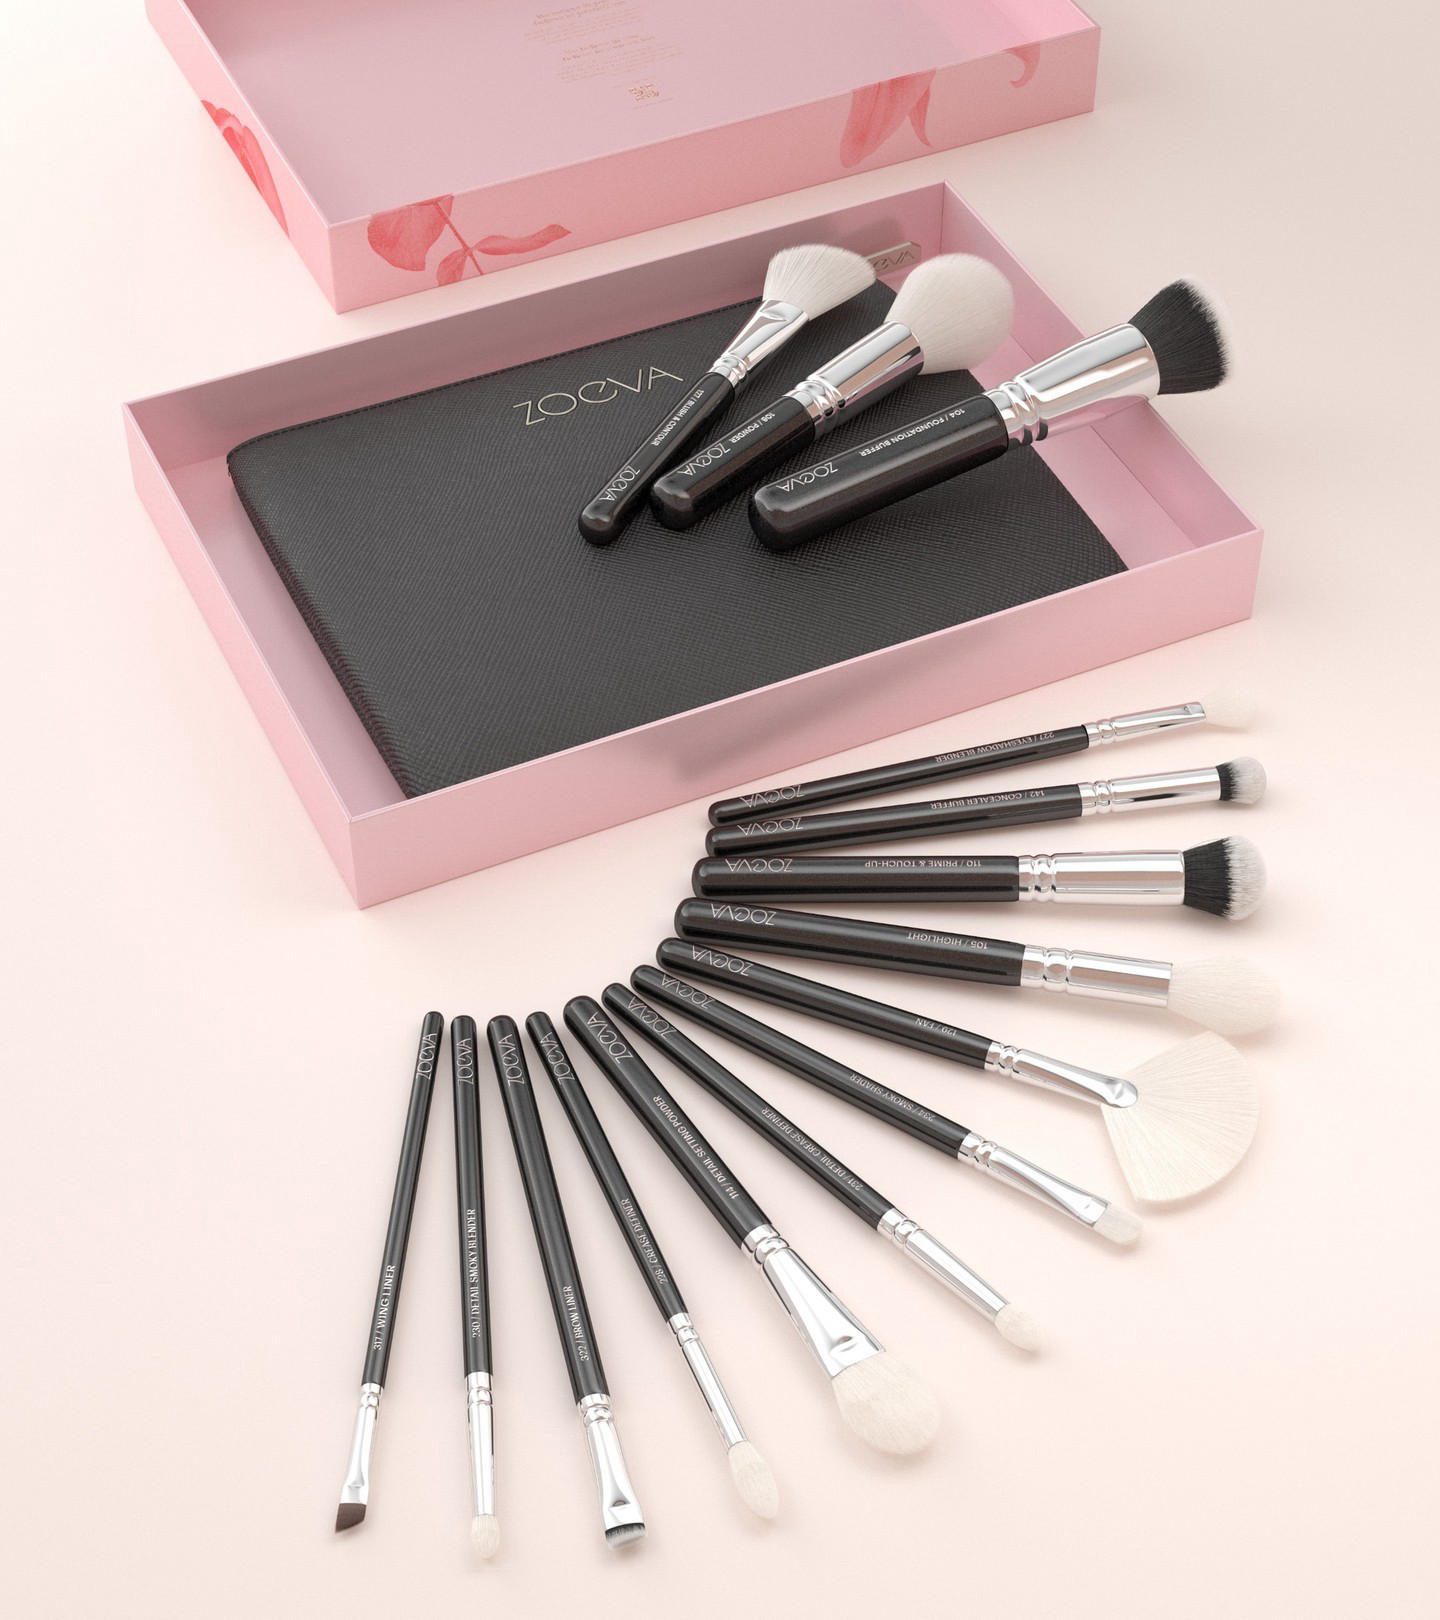 ZOEVA - Our ZOEVA Makeup Brush Sets are the perfect addition to your beauty kit